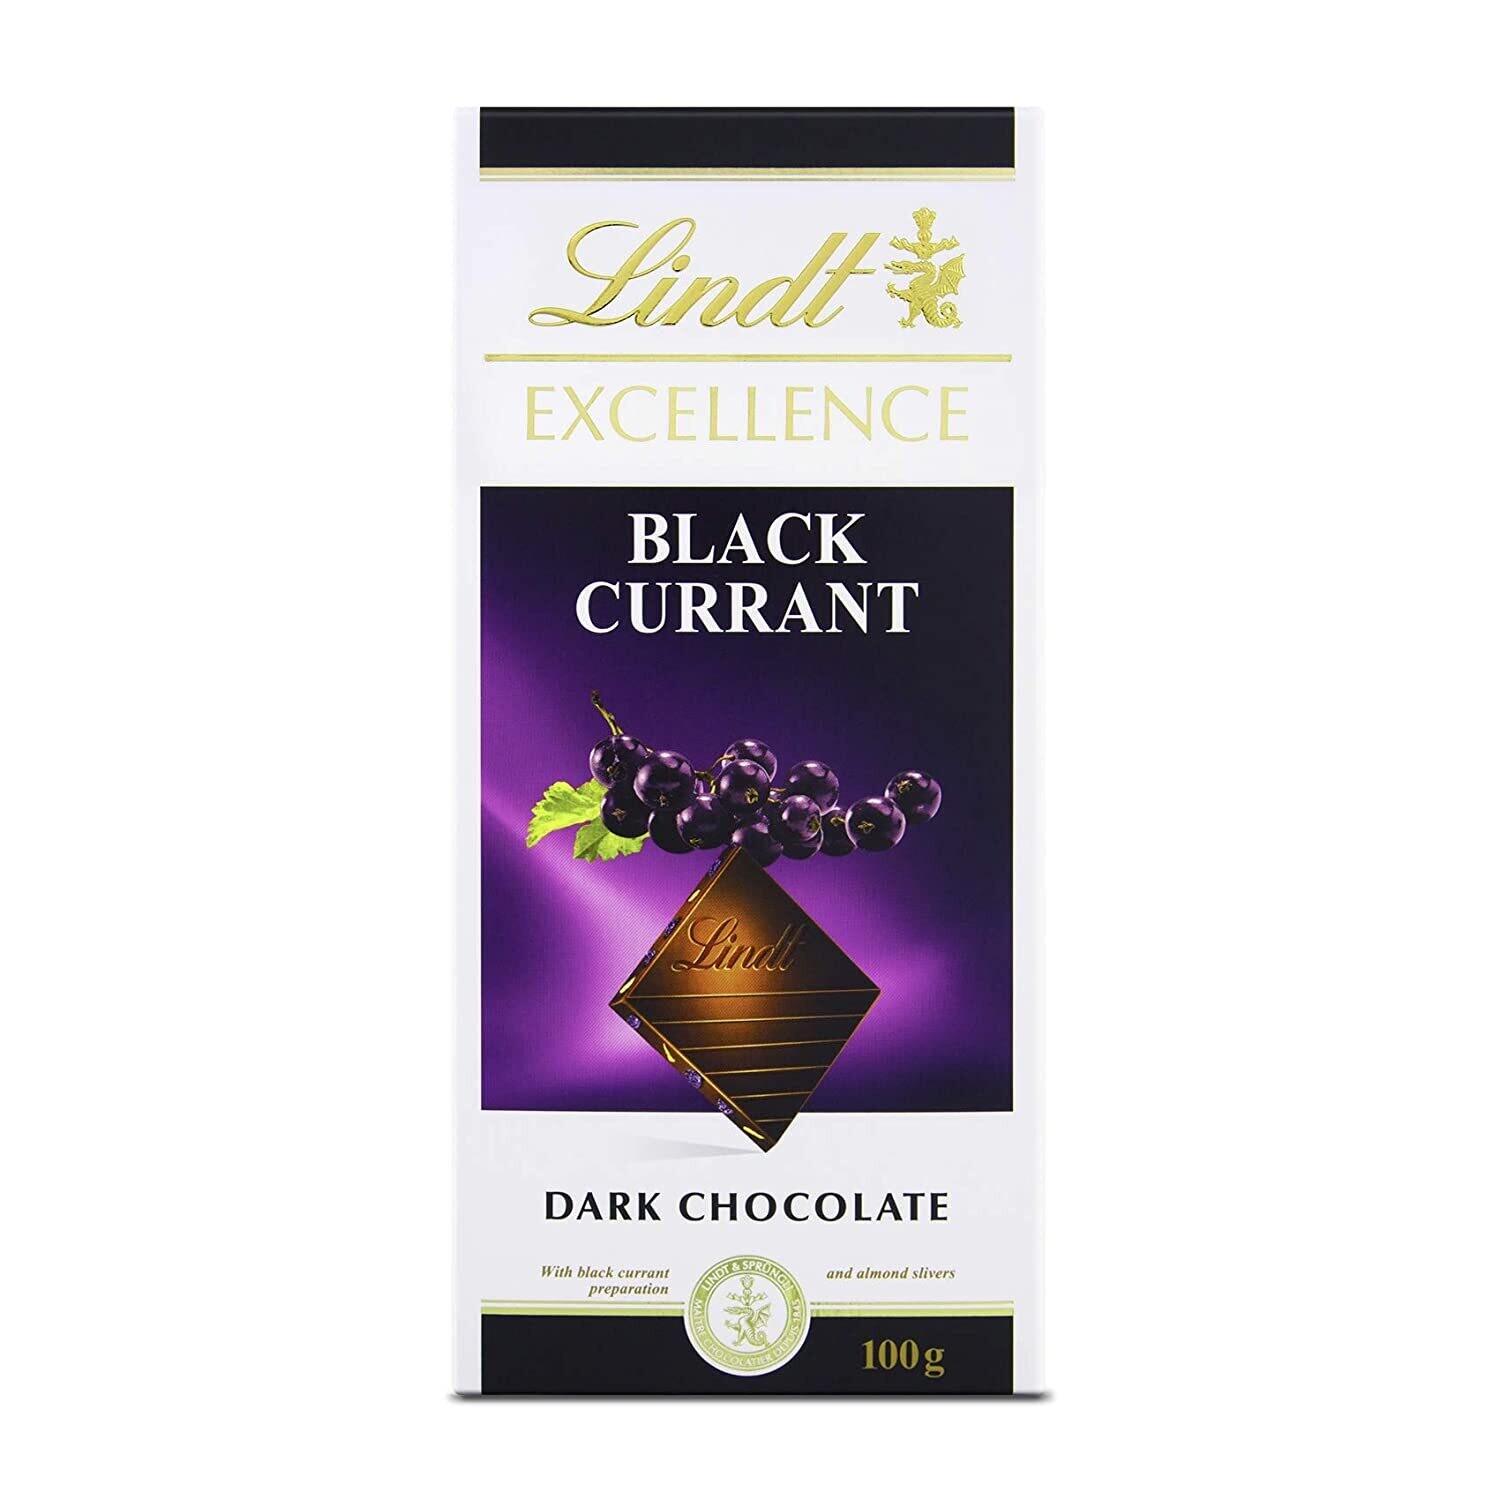 Lindt Excellence Black Currant Dark Chocolate 100g